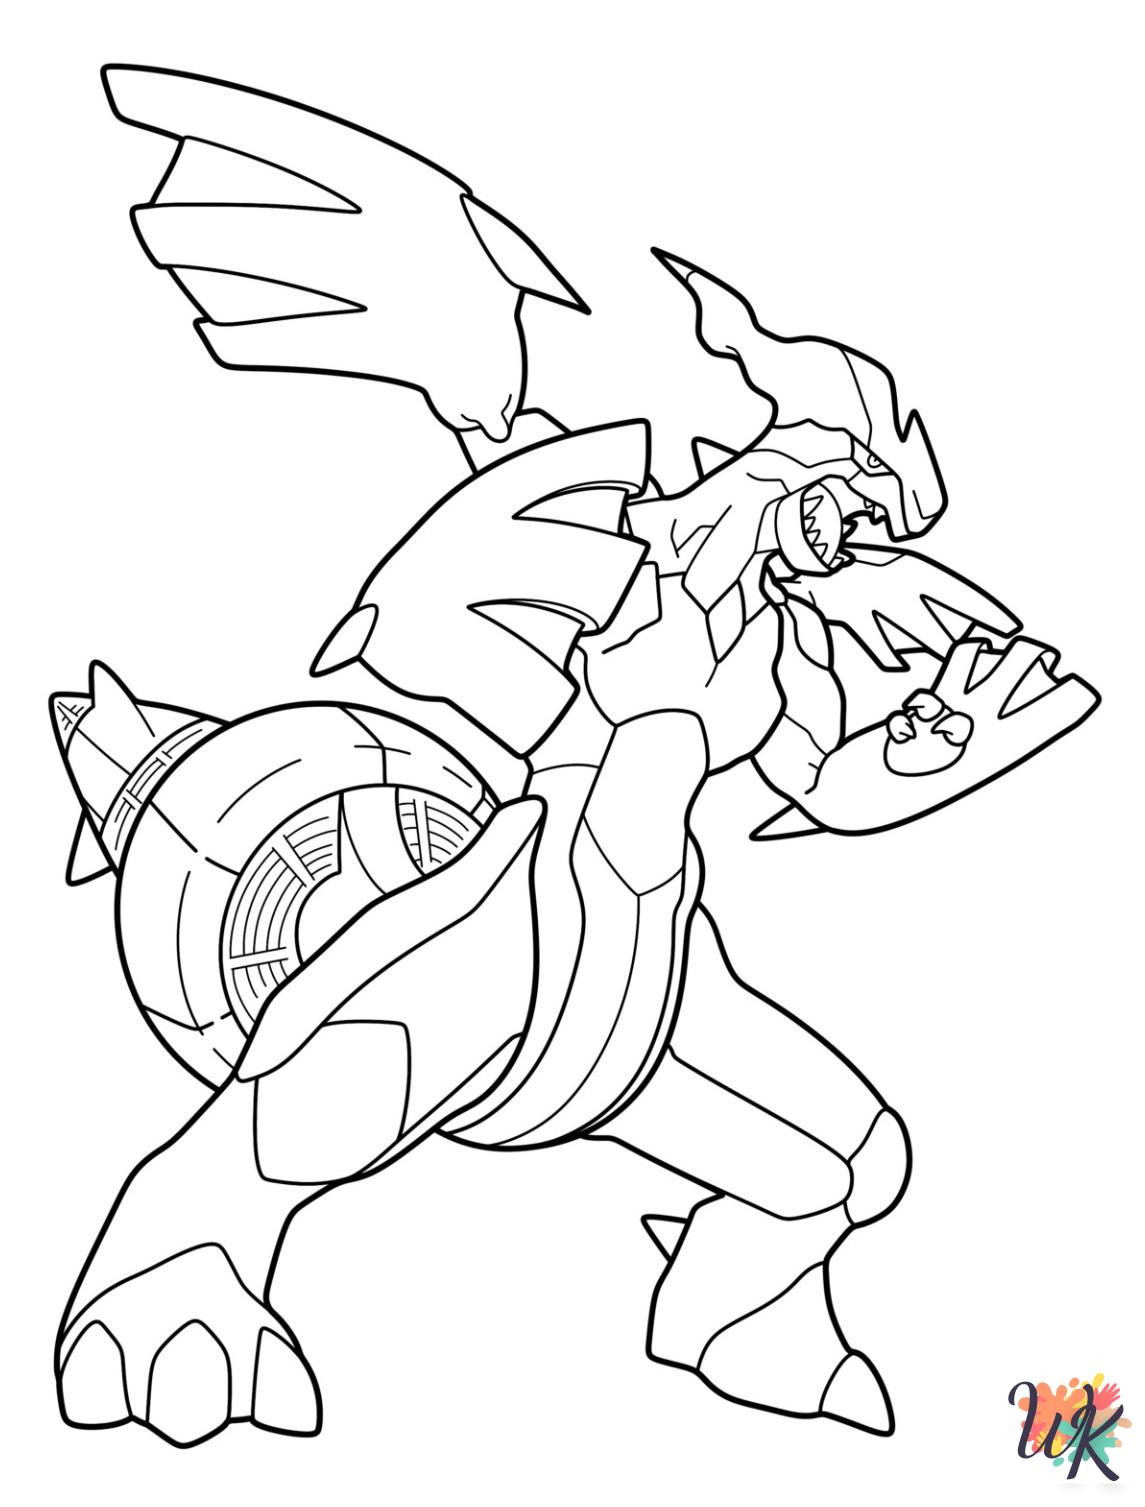 Legendary Pokemon coloring book pages